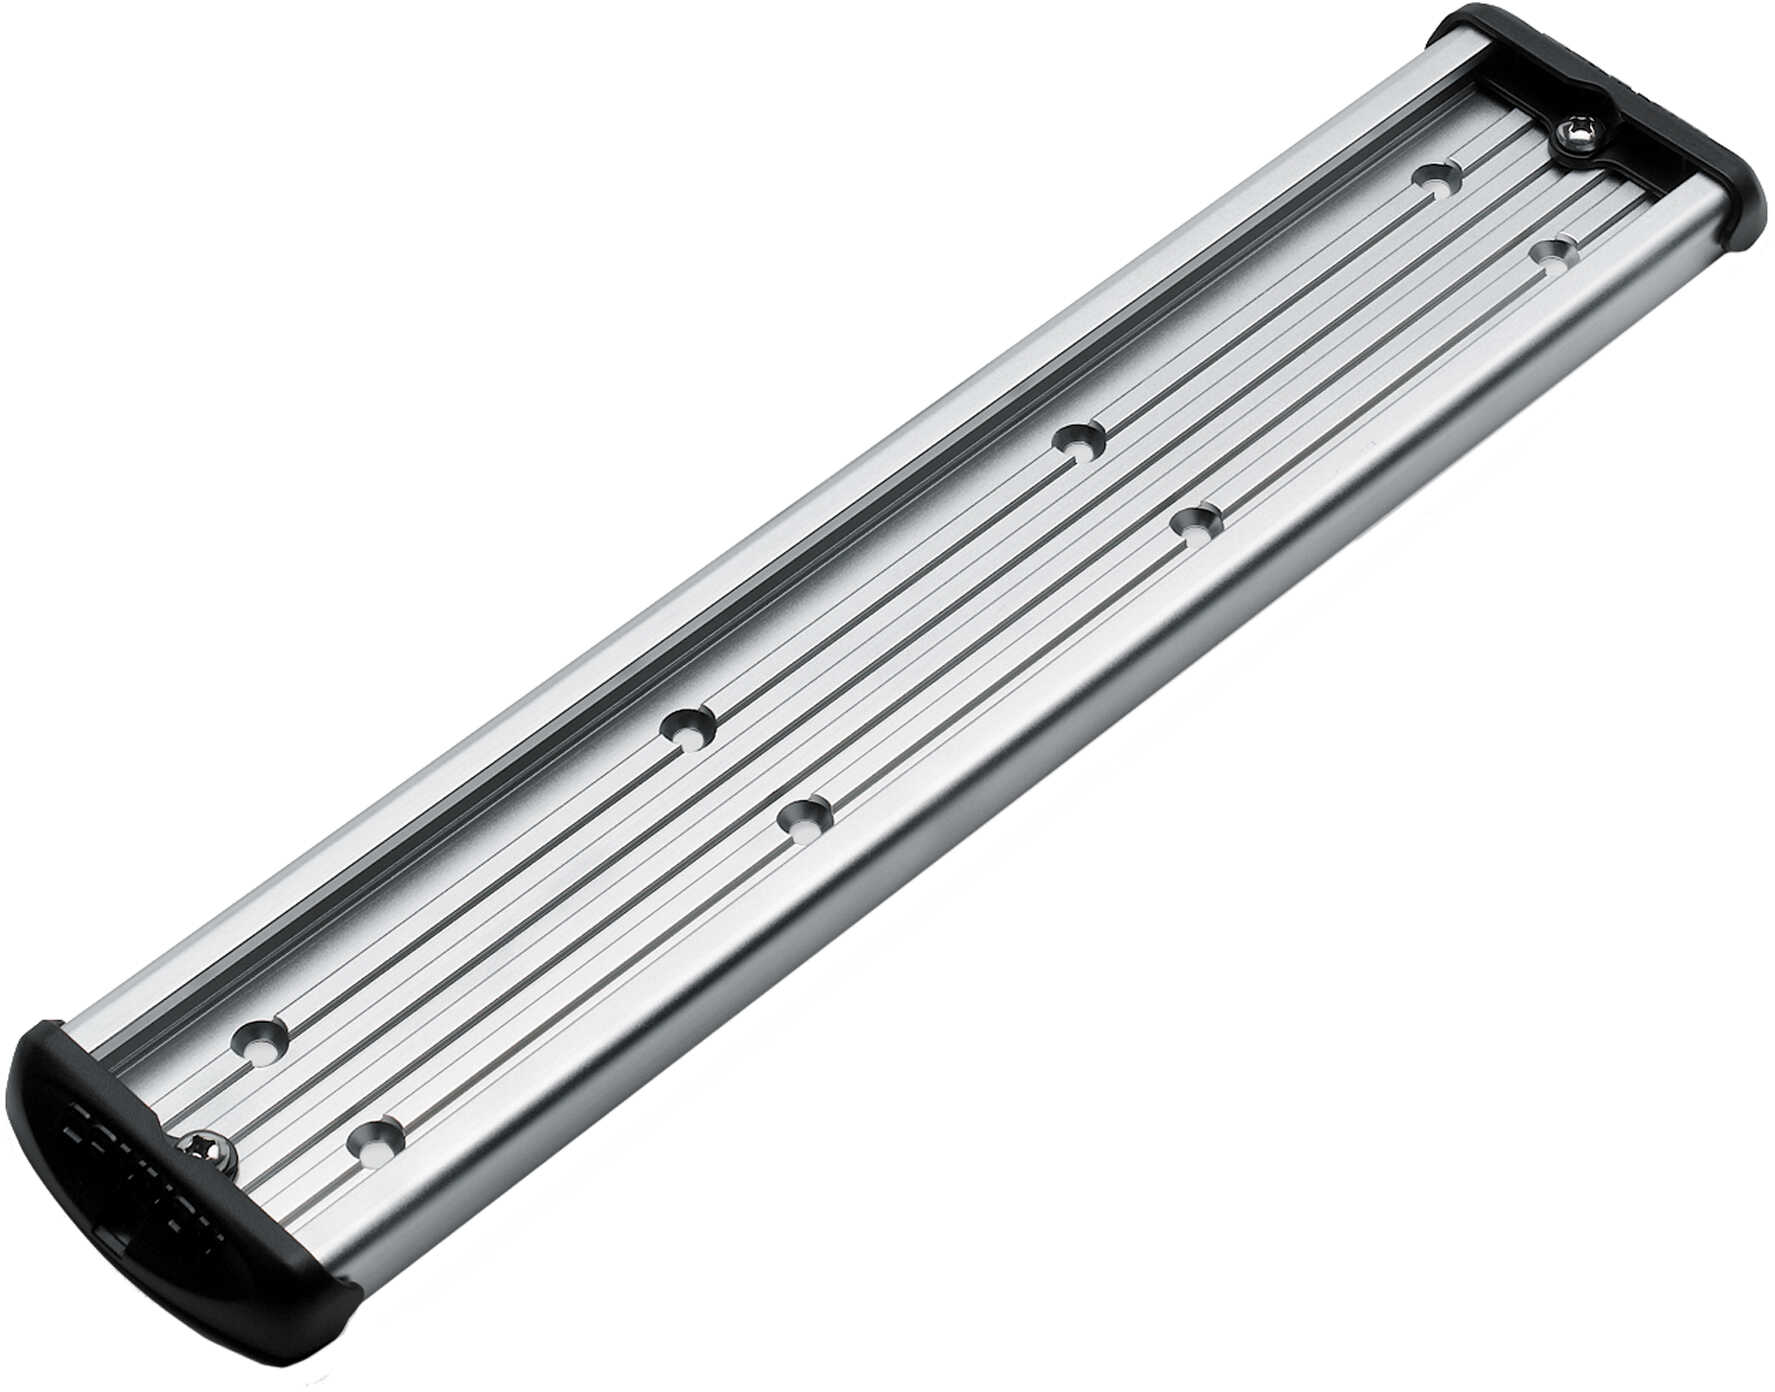 Cannon Aluminum Mounting Track - 18"